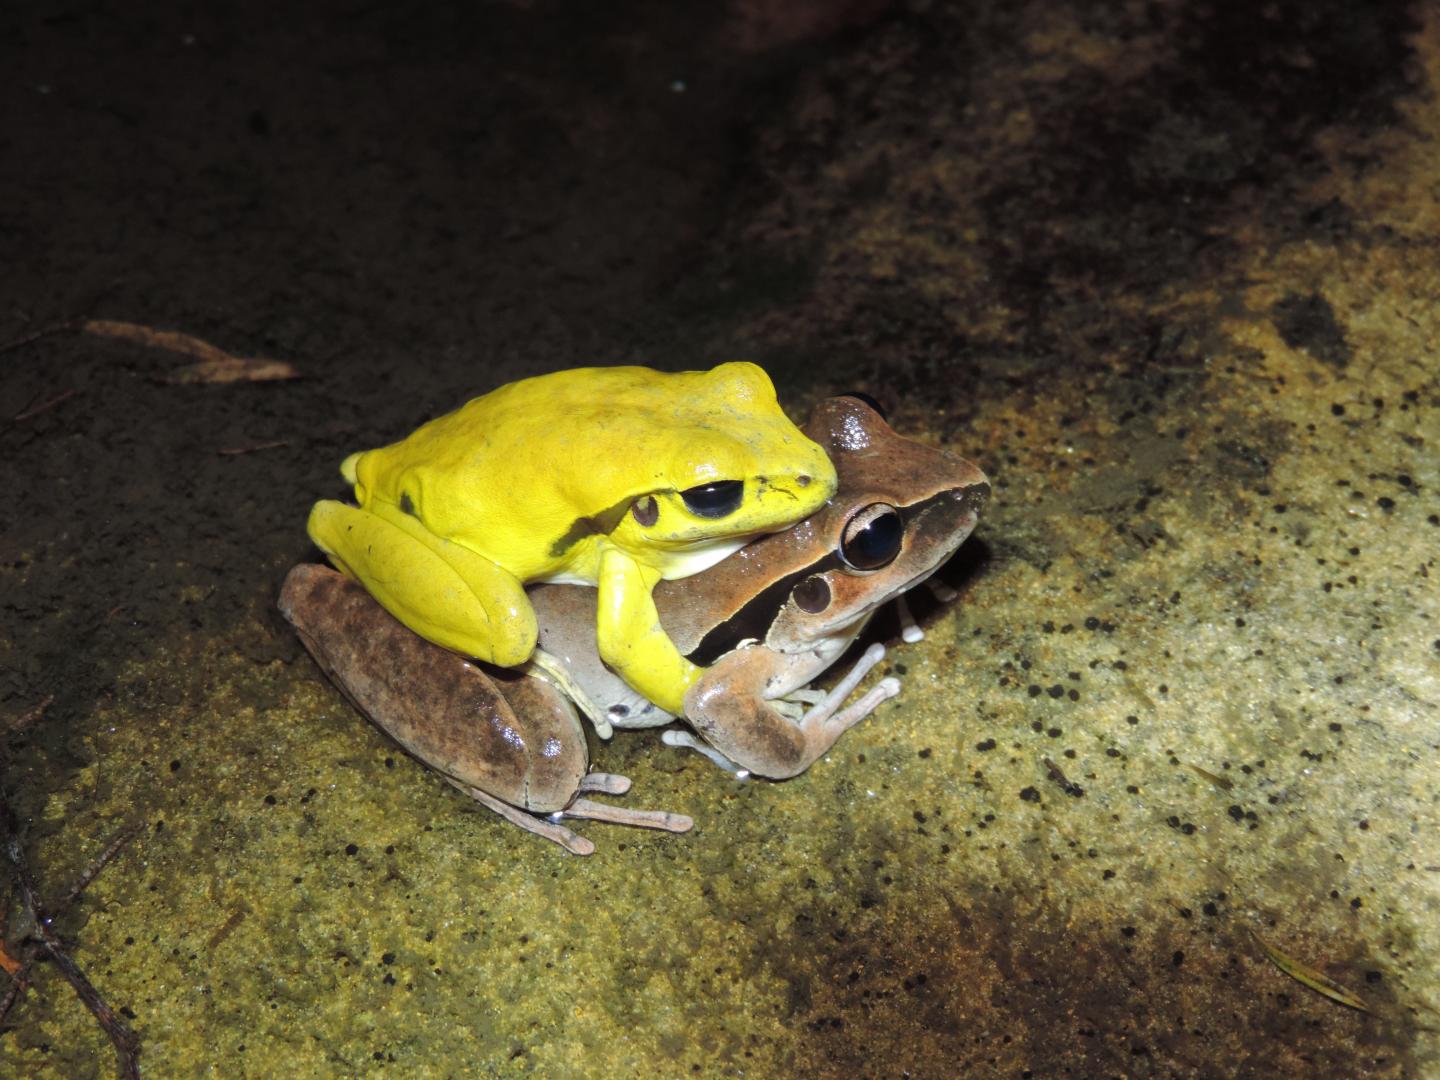 Mating Wilcox's Frogs (<i>Litoria wilcoxii</i>) With the Male (Yellow) In Display Coloration